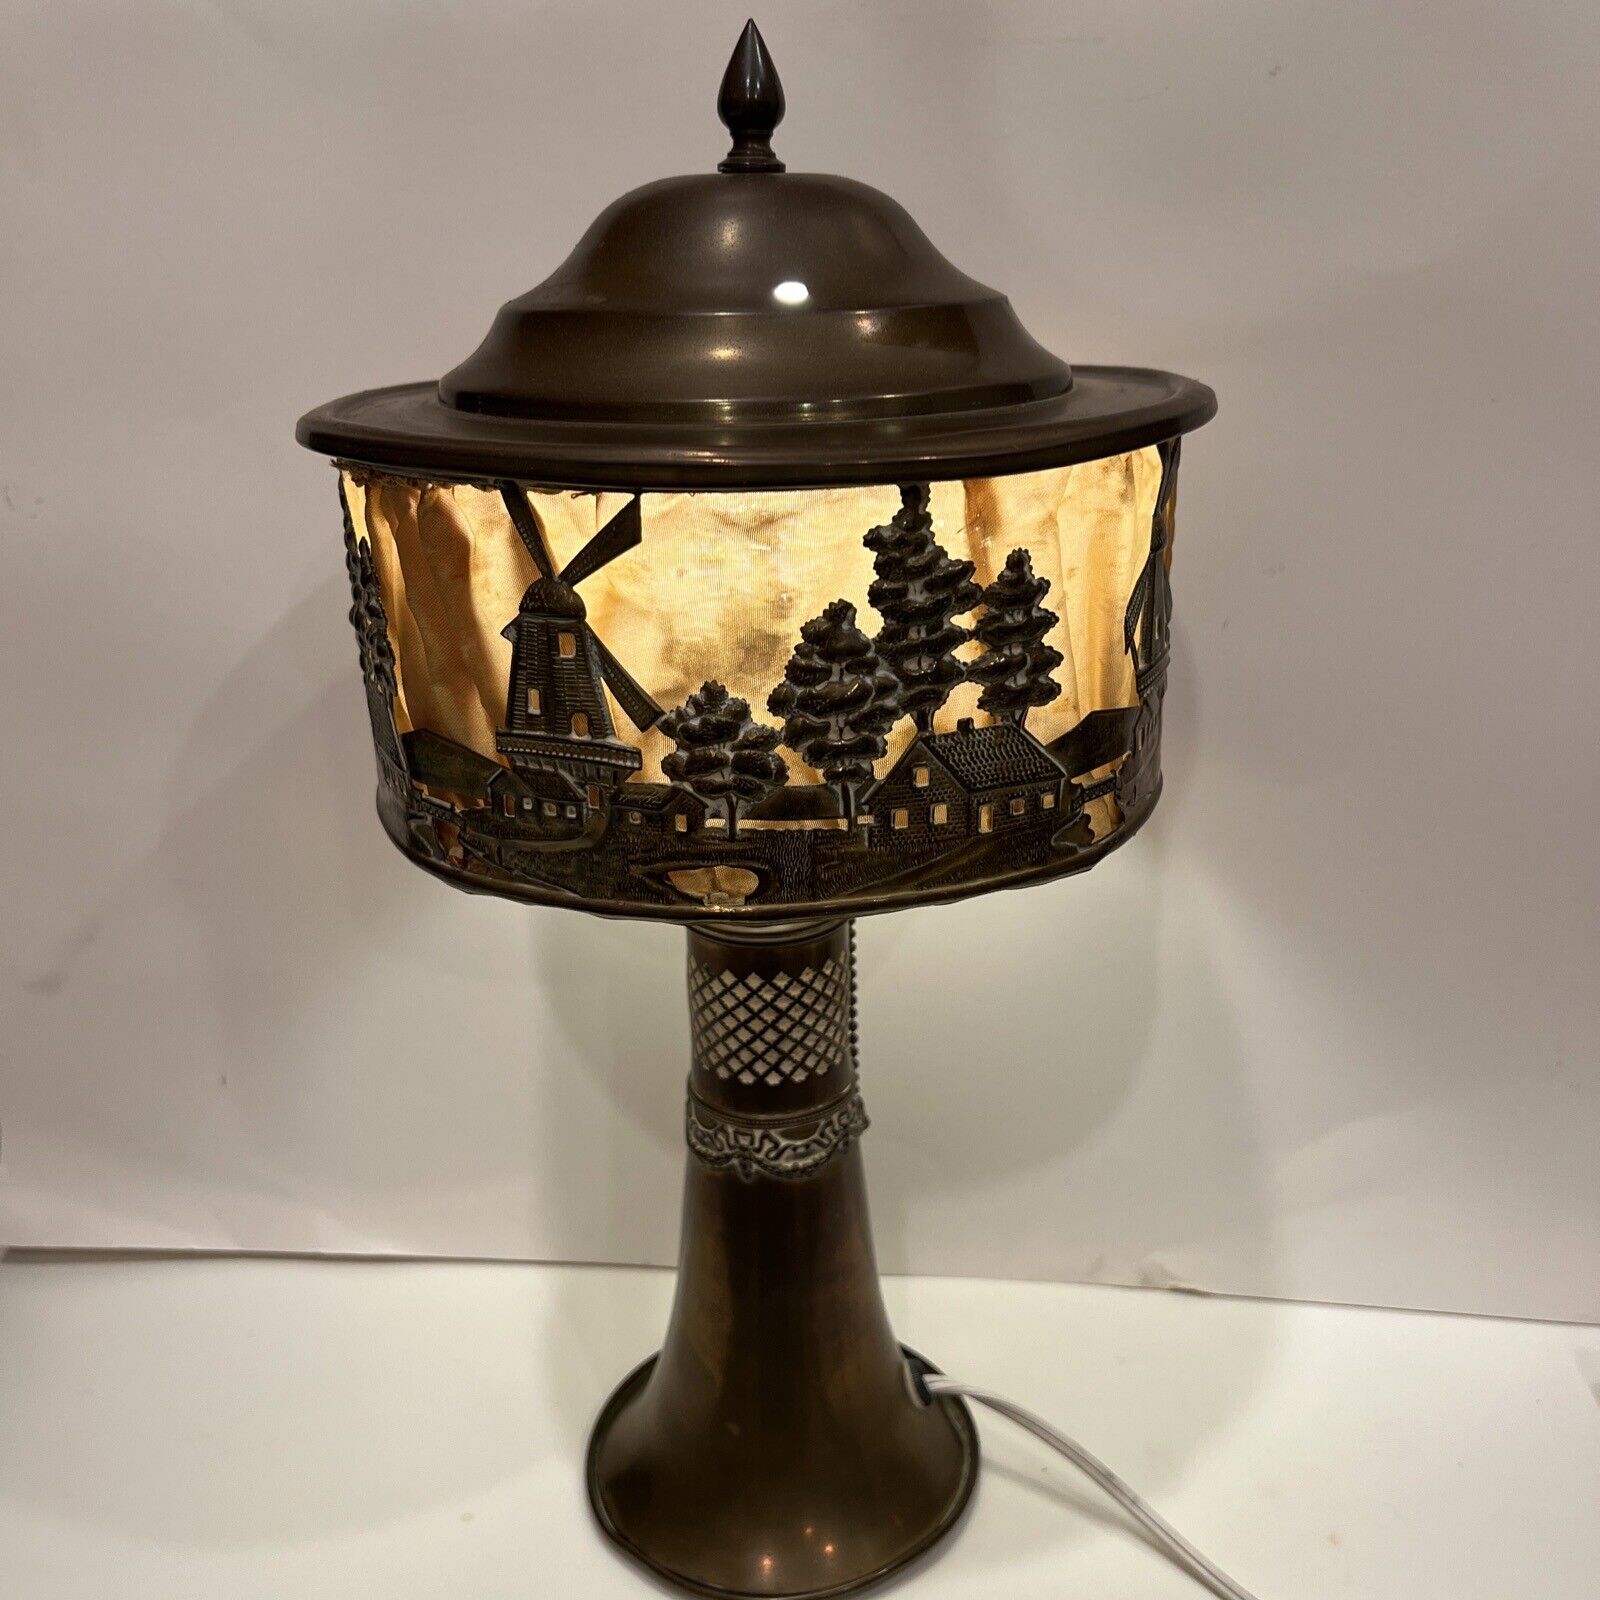 ANTIQUE BRASS LAMP WITH WINDMILLS, TREES, HOMES OOAK FABRIC SHADE 16” Tall